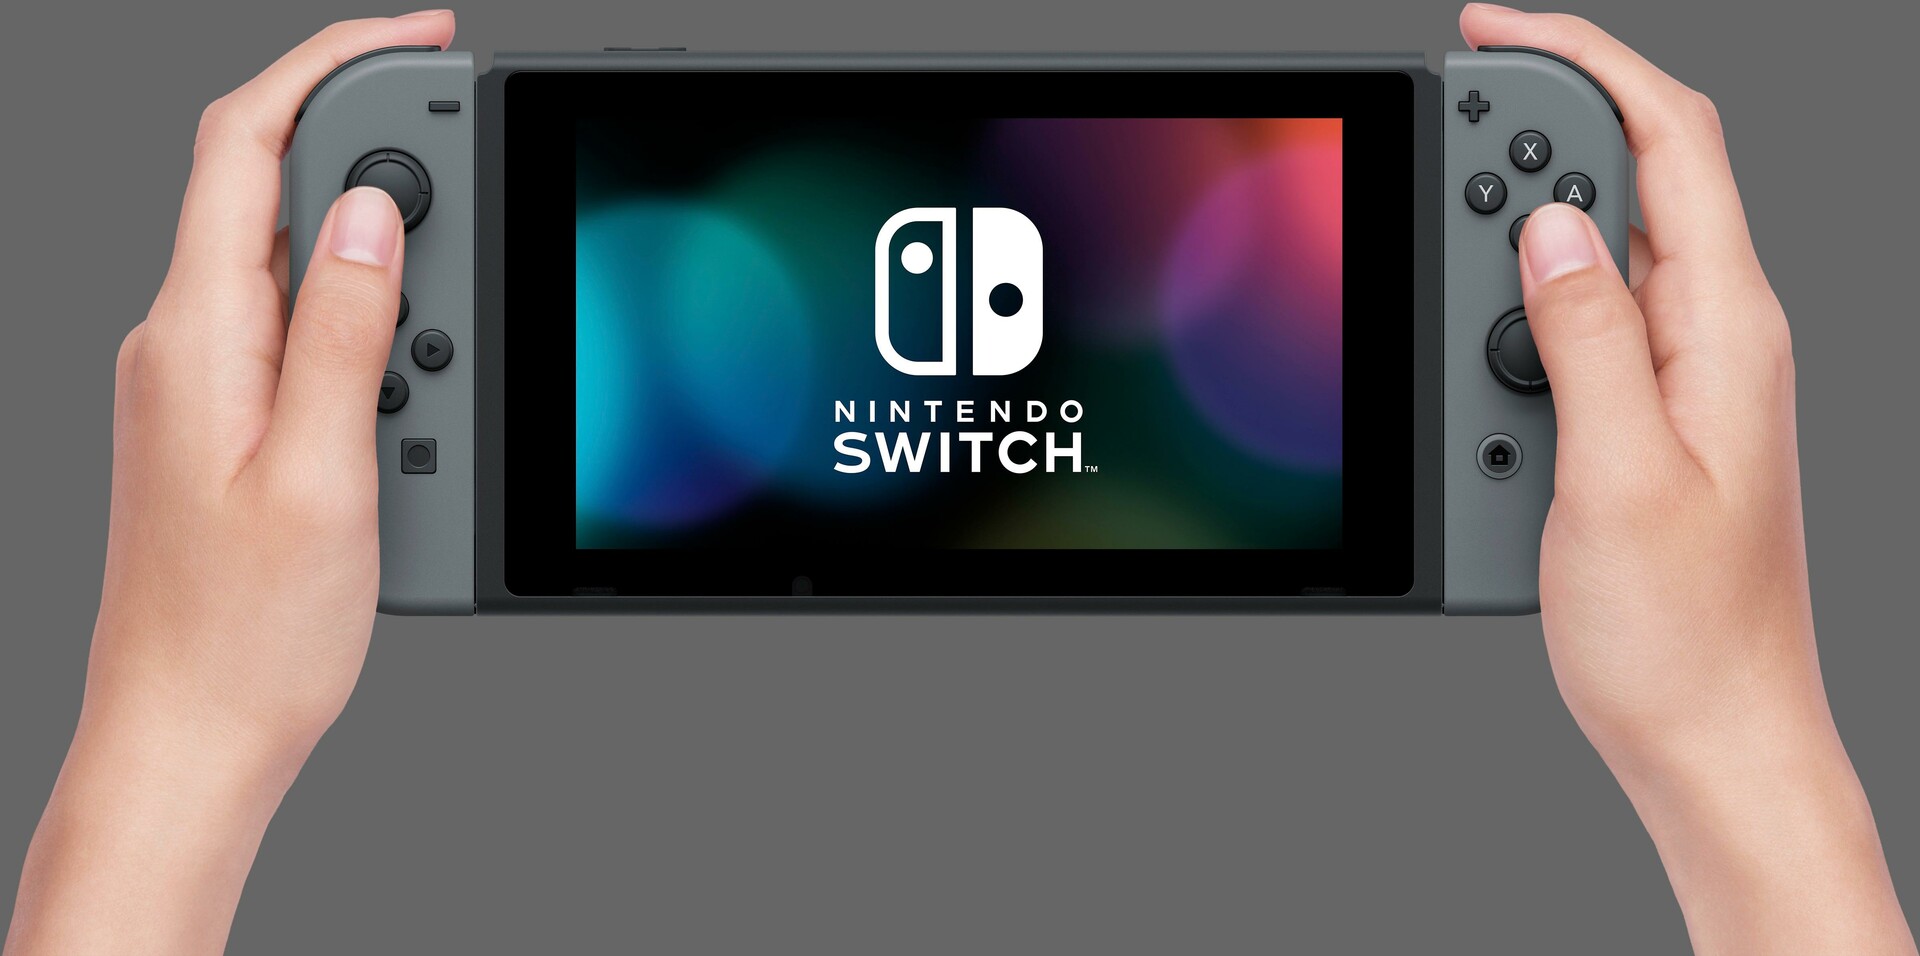 where can you buy the cheapest nintendo switch